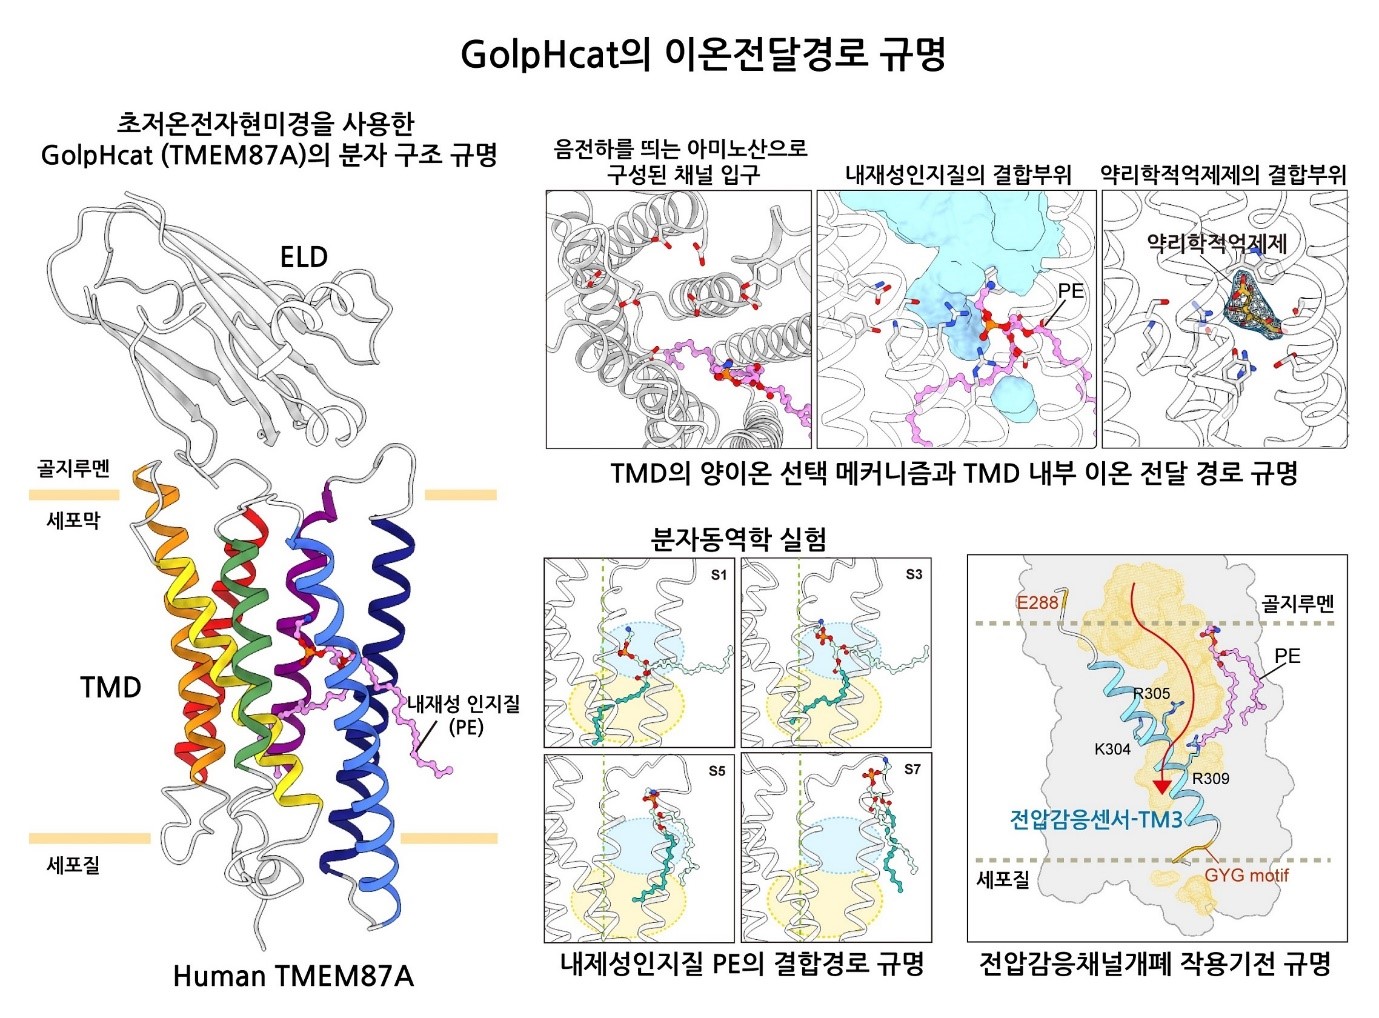 Figure 1. Schematic of Molecular Structure Study of GolpHCat<br> Using cryo-electron microscopy, the molecular structure of human GolpHCat was elucidated at high resolution, revealing that GolpHCat is an ion channel with a unique structure composed of two domains in a monomeric form. Additionally, the complex structure with a pharmacological inhibitor (gluconate) and the structure of mutants that interfere with phospholipid binding were identified. Based on these molecular structures, electrophysiological experiments and molecular dynamics modeling experiments were conducted to elucidate the ion transport pathway within the monomer and the mechanism of voltage-gated channel opening and closing. Specifically, it was found that negatively charged residues inside the funnel-shaped lumen of GolpHCat serve as entry points that attract cations. It was confirmed that the pharmacological inhibitor blocks an important ion transport pathway inside GolpHCat (top right). Furthermore, molecular dynamics experiments identified the phospholipid binding pathway and various binding forms of phospholipids, proposing the mechanism of voltage sensing and voltage-gated channel opening and closing in GolpHCat (bottom right).